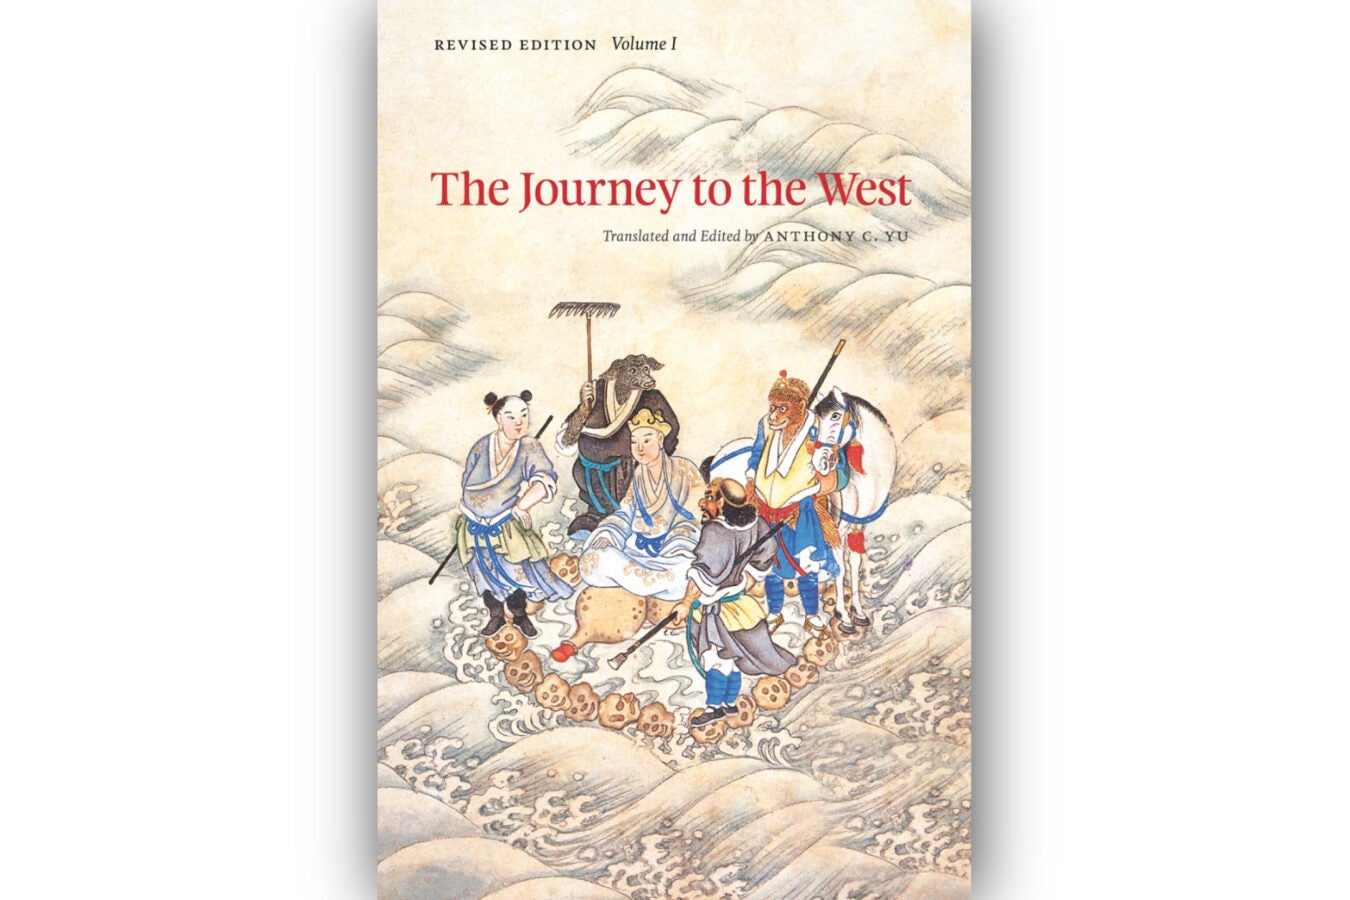 "The Journey to the West" book cover.